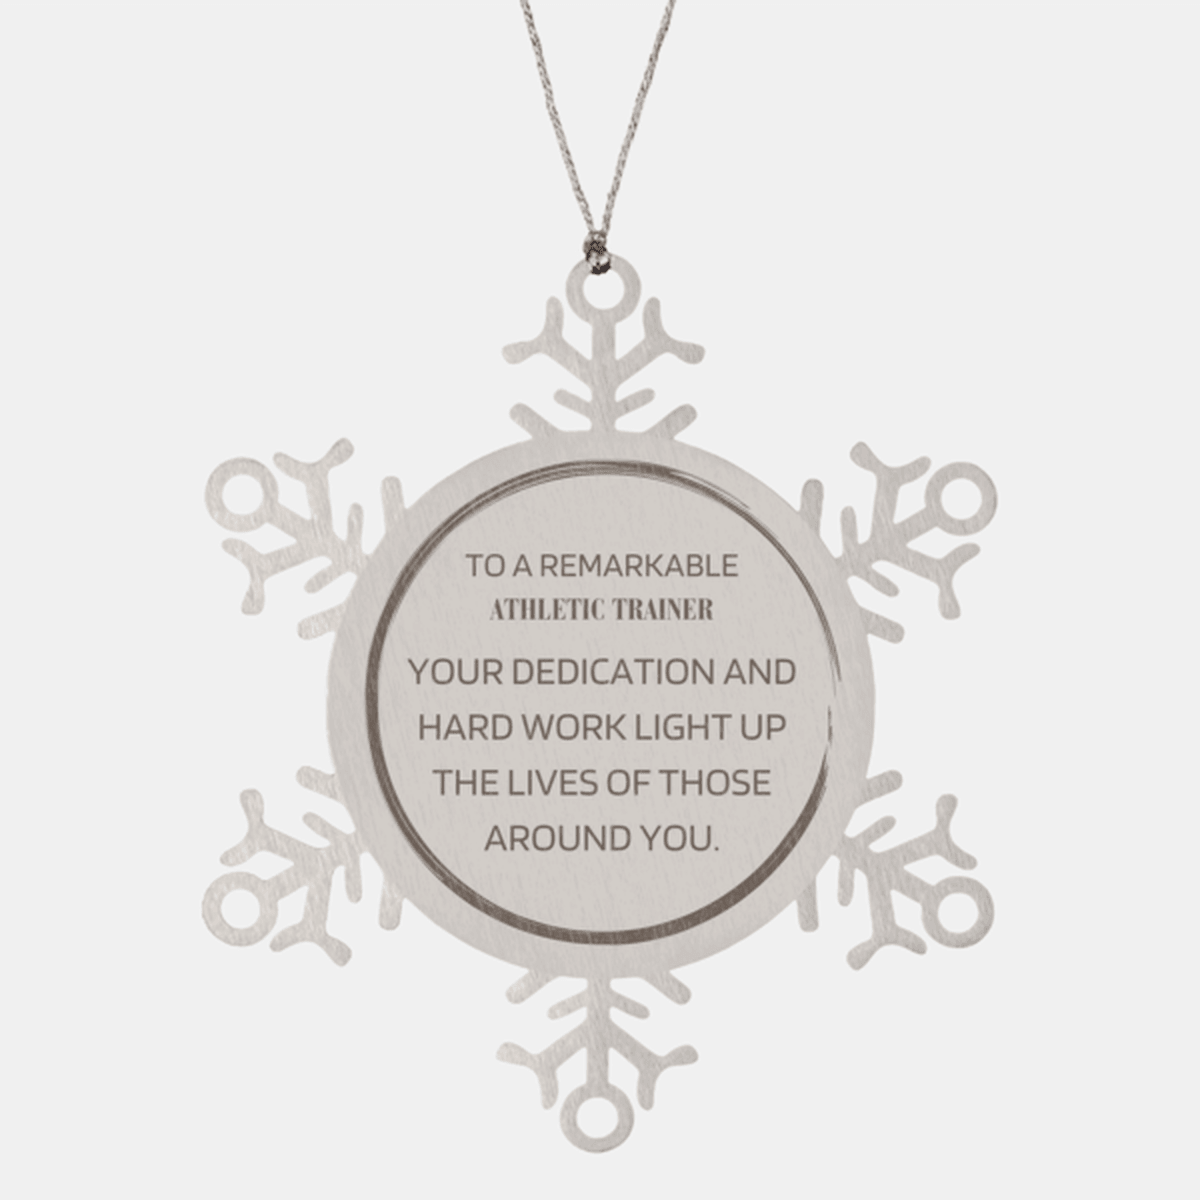 Remarkable Athletic Trainer Gifts, Your dedication and hard work, Inspirational Birthday Christmas Unique Snowflake Ornament For Athletic Trainer, Coworkers, Men, Women, Friends - Mallard Moon Gift Shop